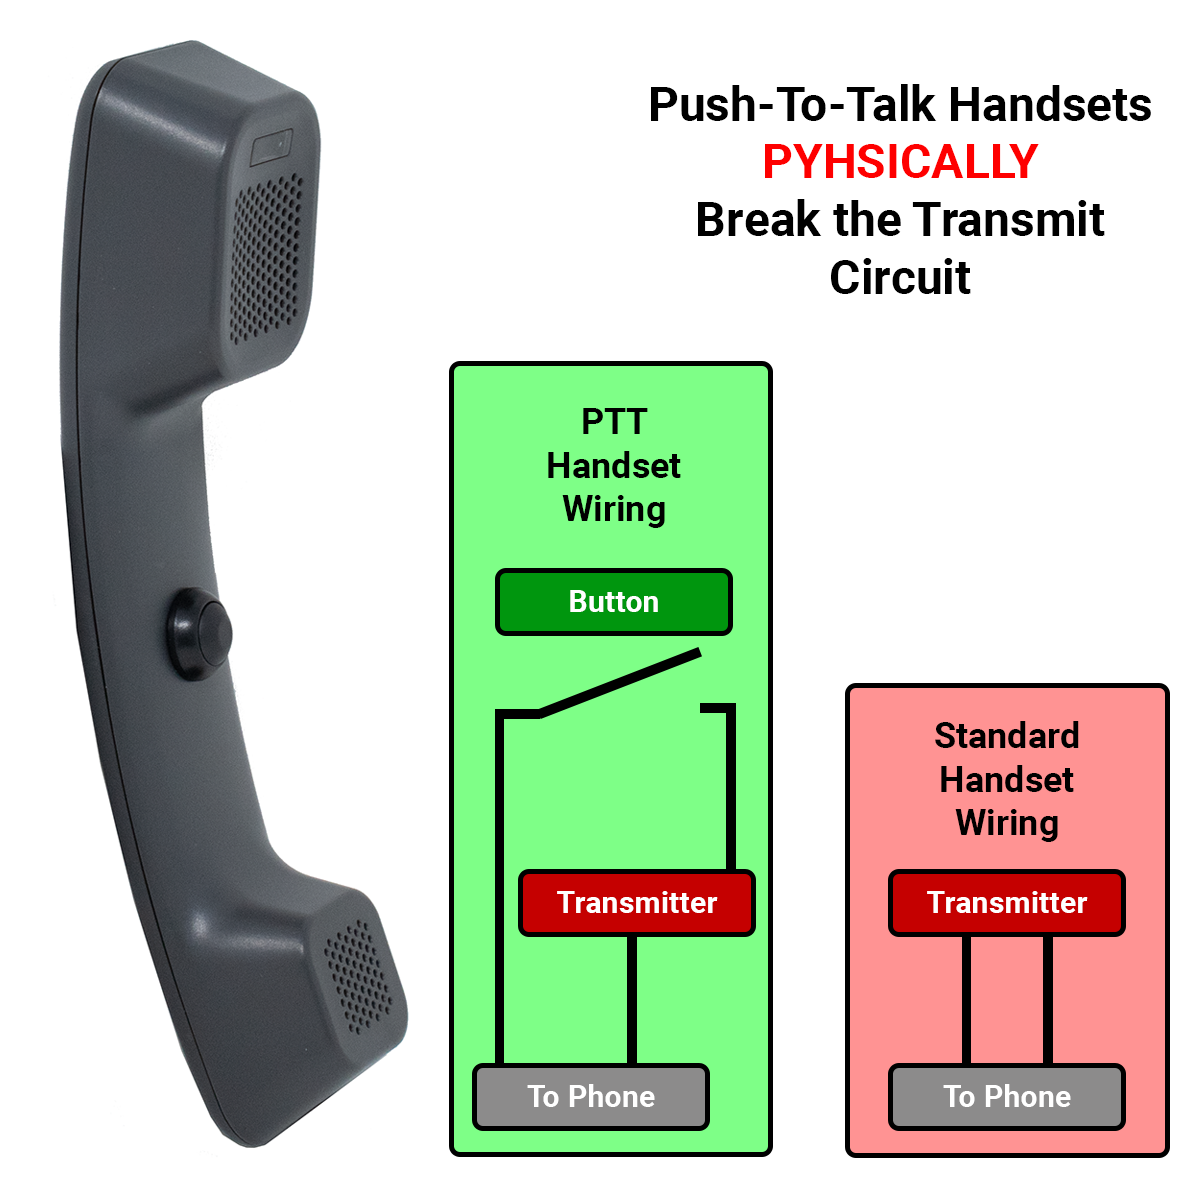 How a Push-To-Talk Handset Works